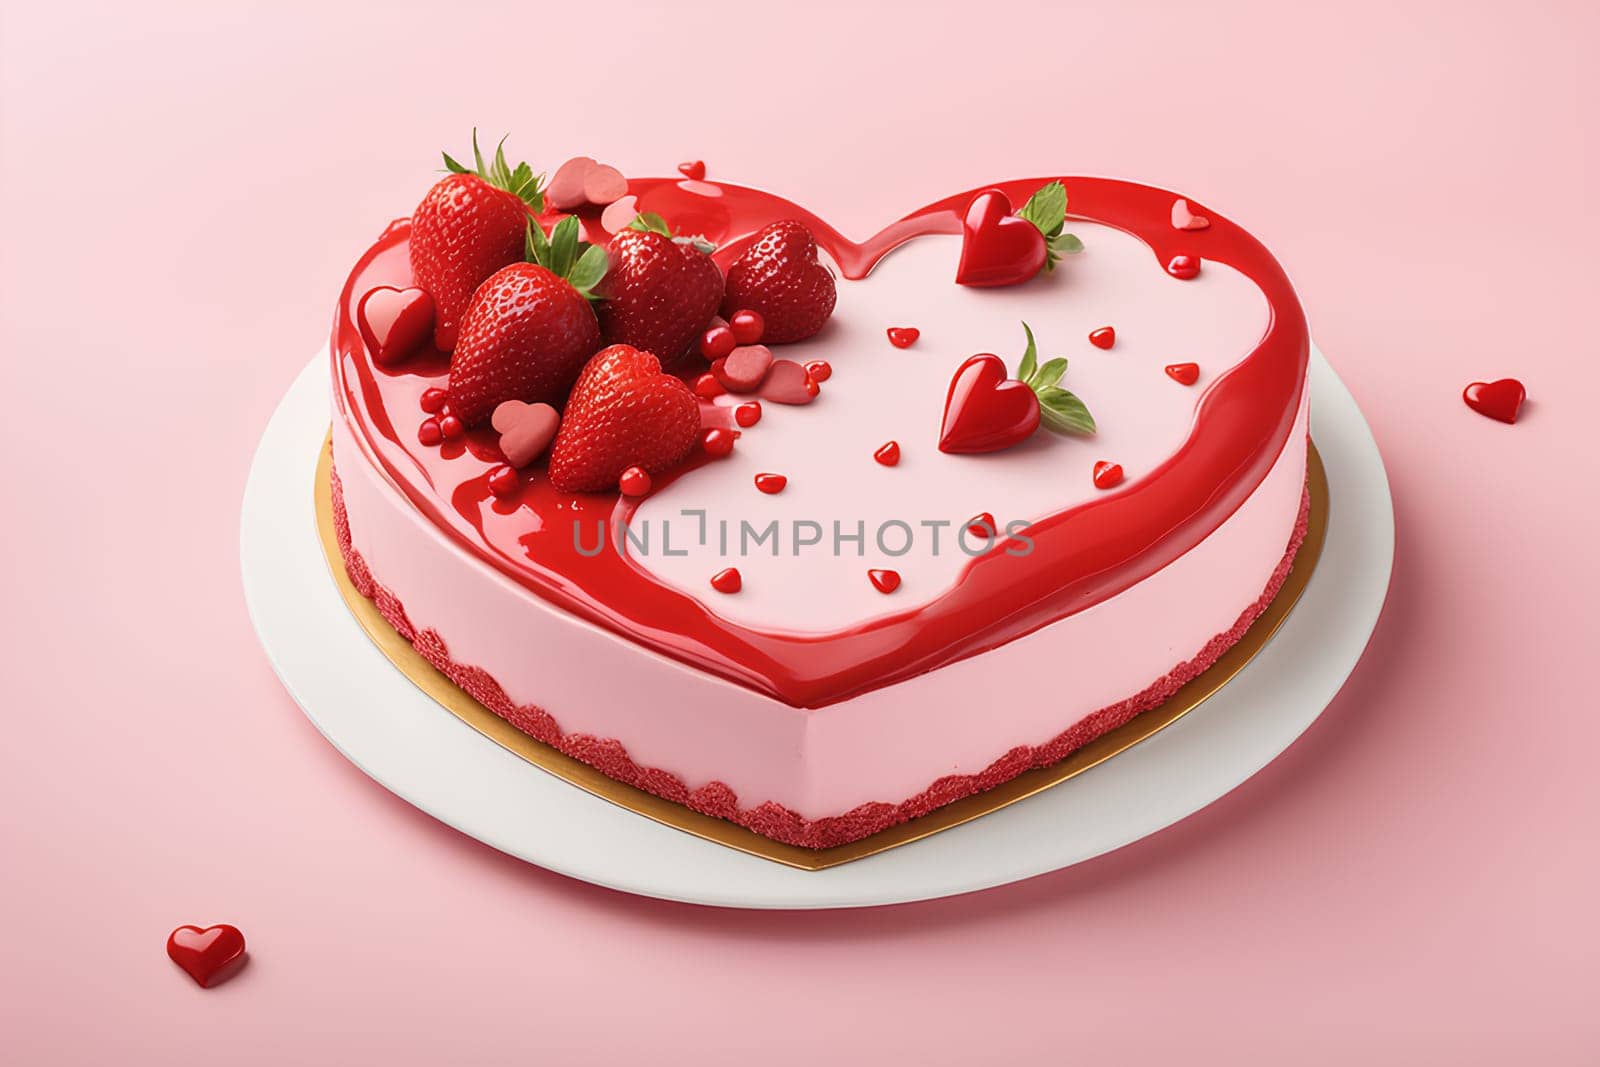 Heart-shaped mousse cake for Valentine's Day. by Annu1tochka